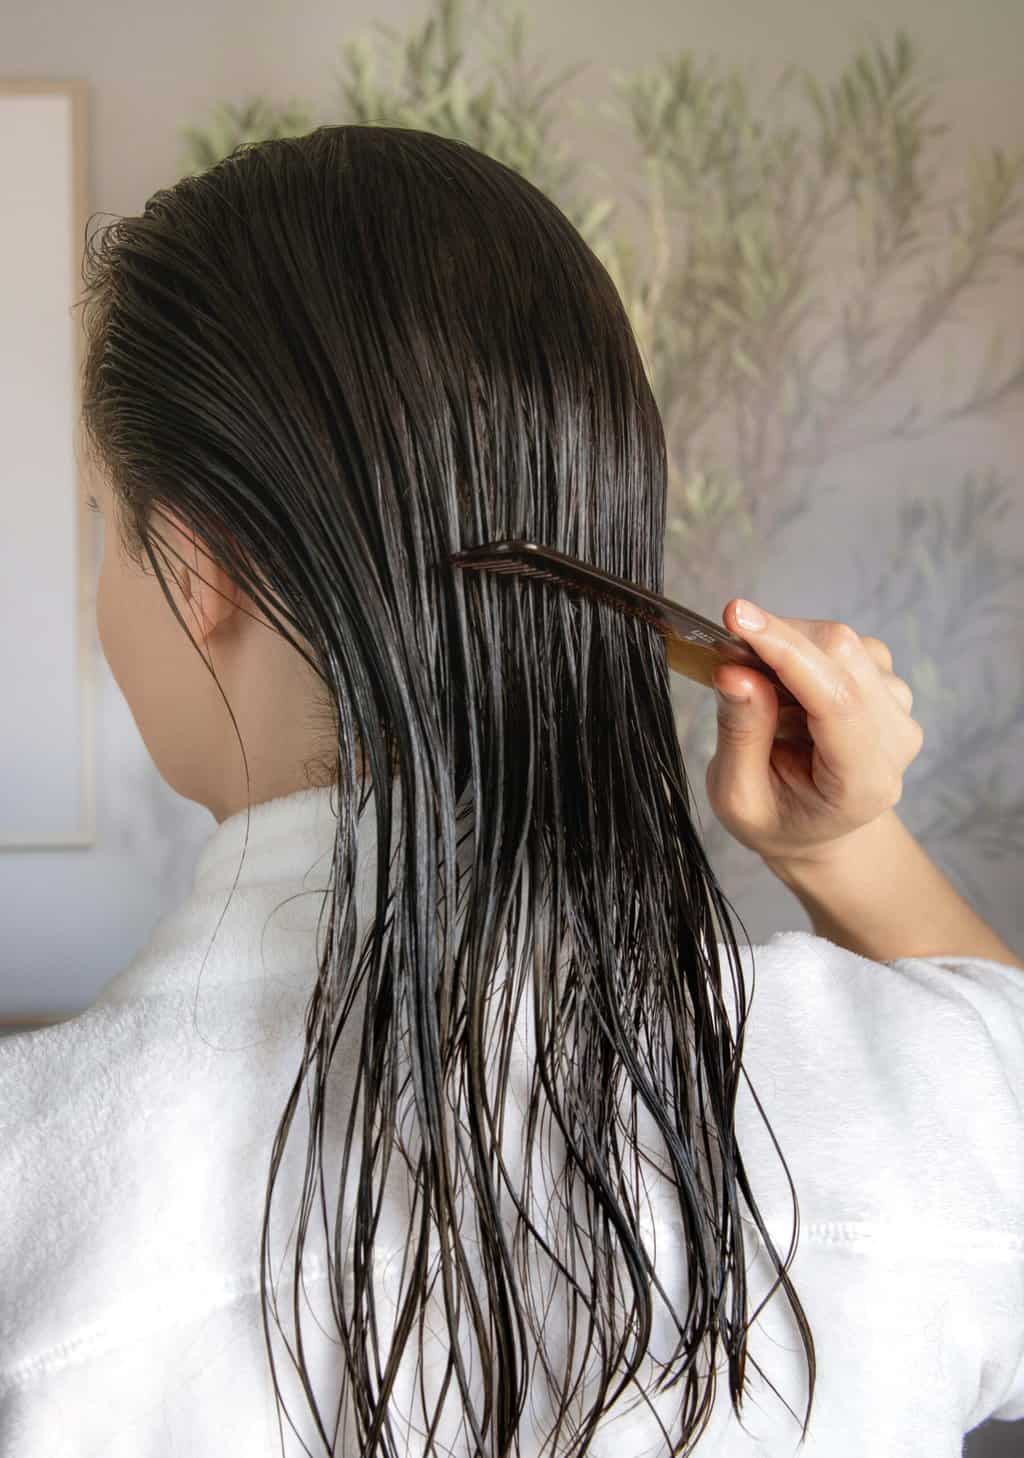 How to Apply a Mayo Hair Mask